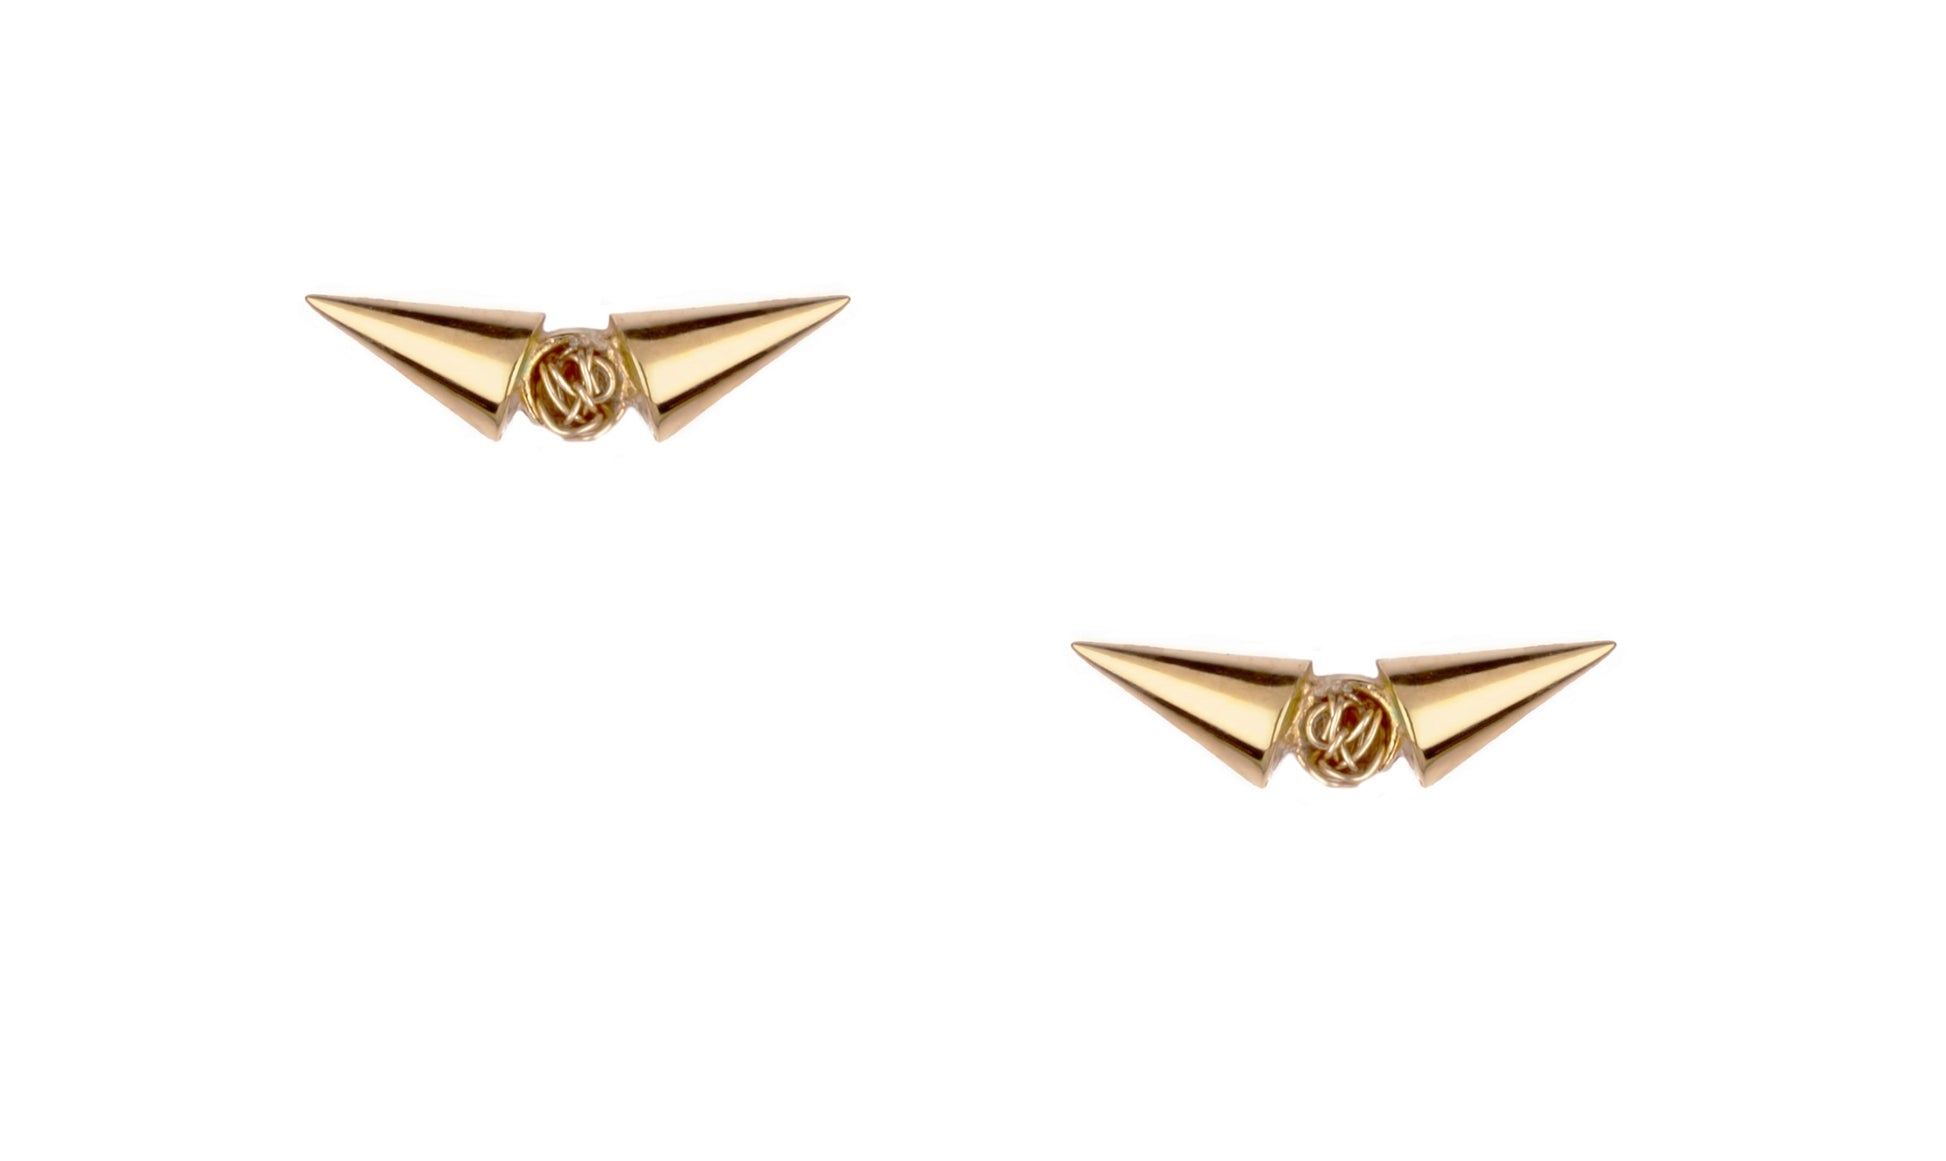 Minimalist stud gold earrings, creating a chic and contemporary look.